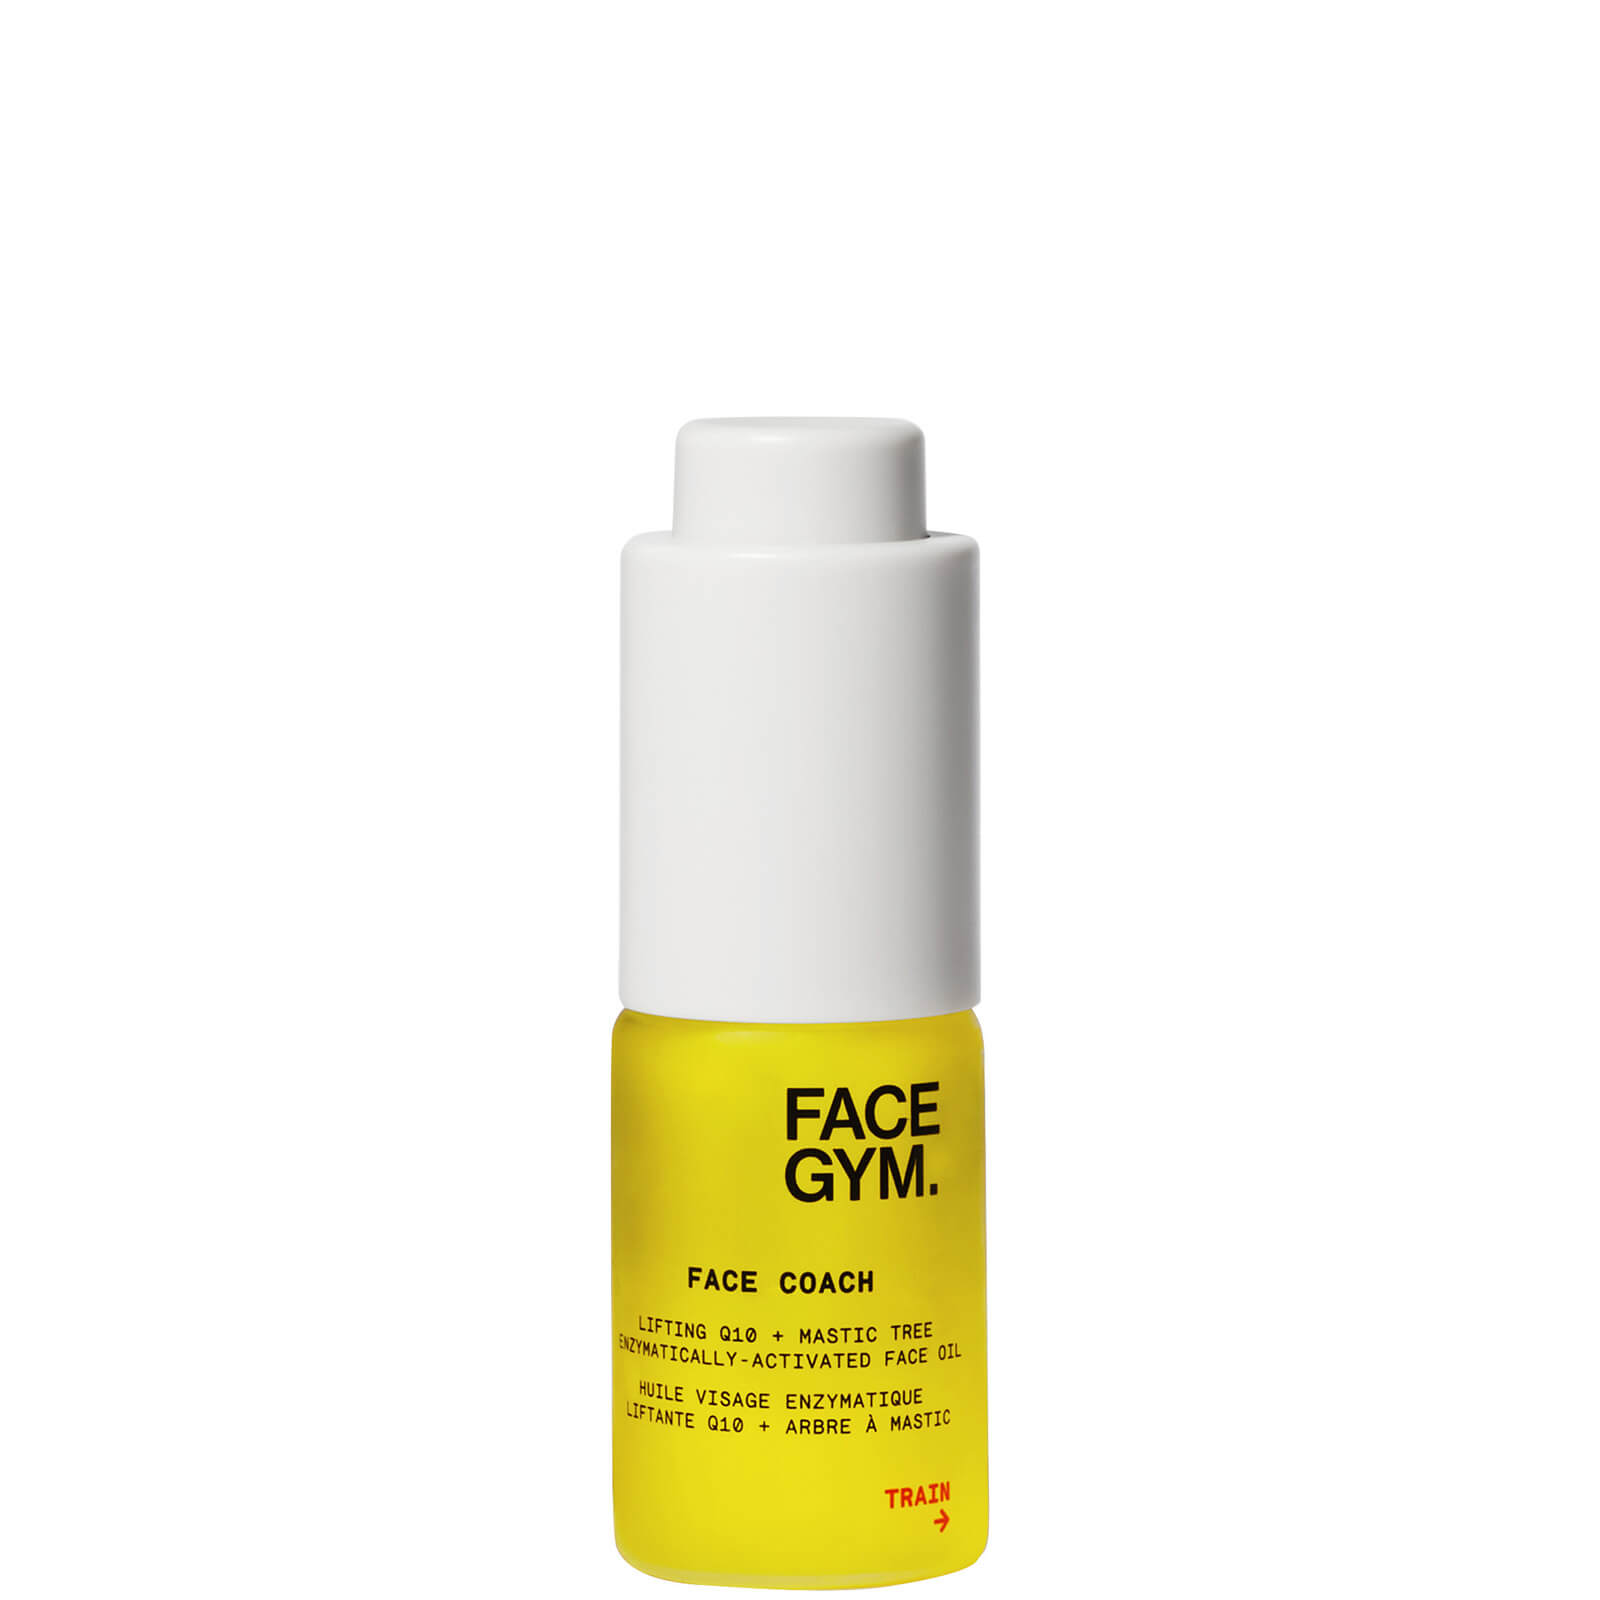 FaceGym Face Coach Lifting Q10 and Mastic Tree Enzymatically-activated Face Oil (Various Sizes) - 15ml